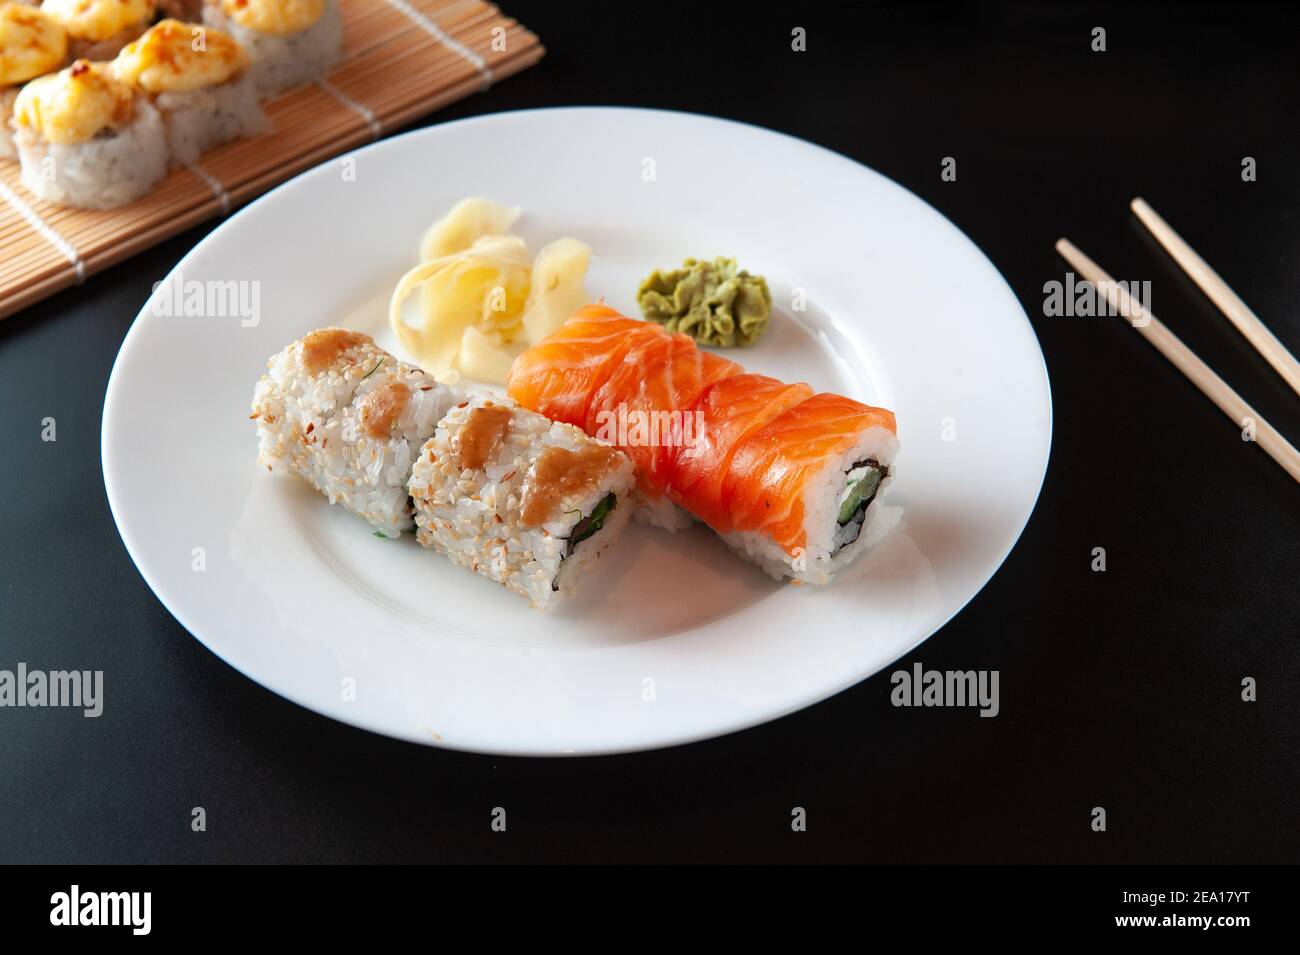 Japanese restaurant menu photo, seafood, national cuisine. Delicious sushi. Appetizing rolls served on white plate, flat lay Stock Photo